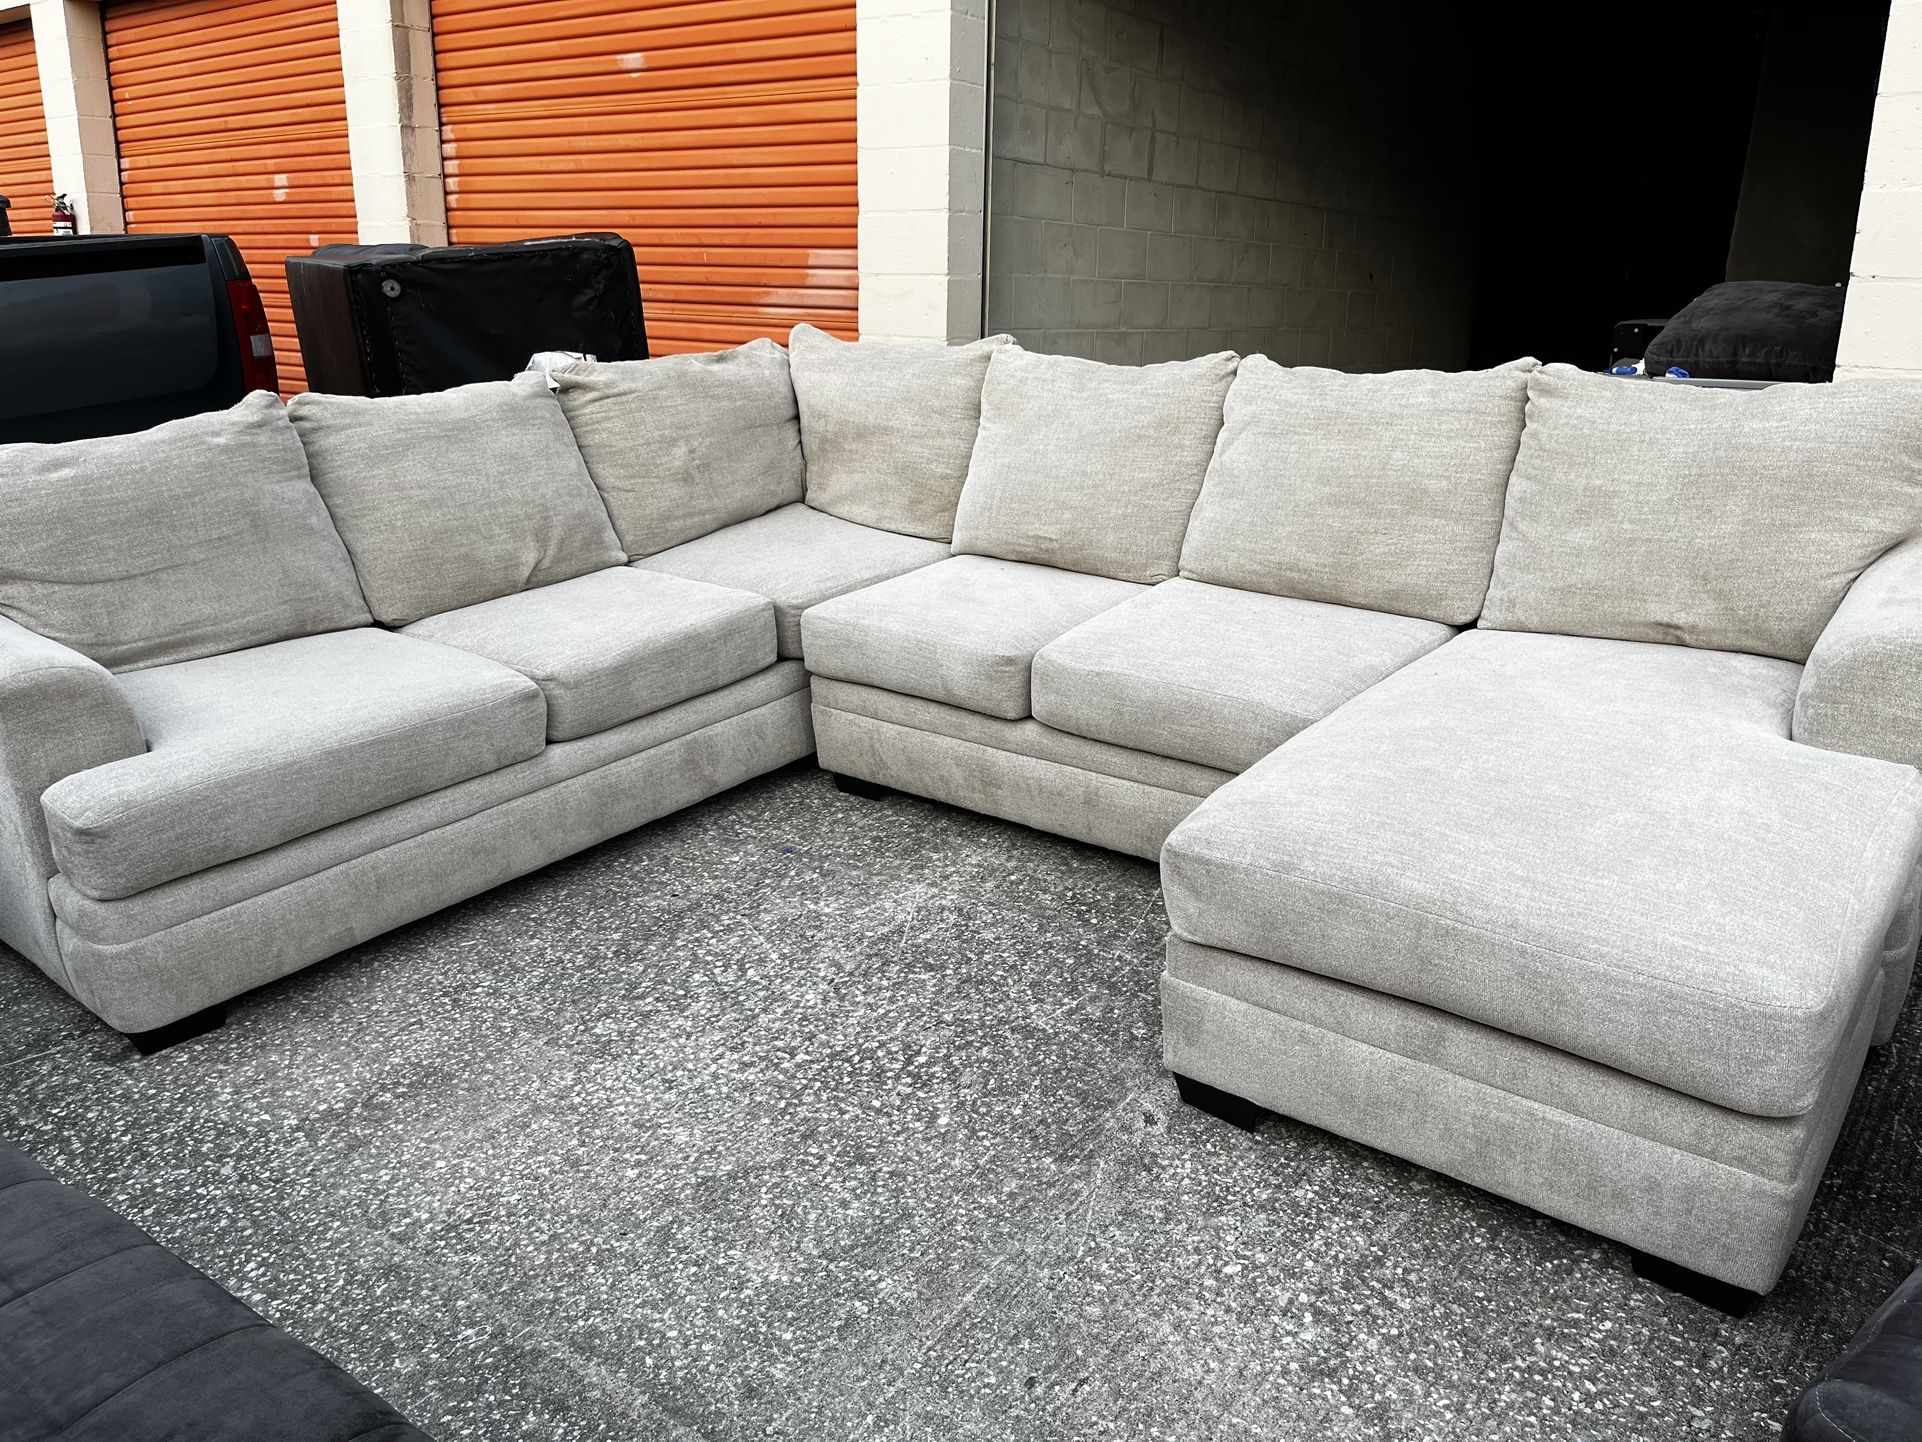 Beautiful Rooms to Go Sectional Couch. Delivery Available, Great Condition!